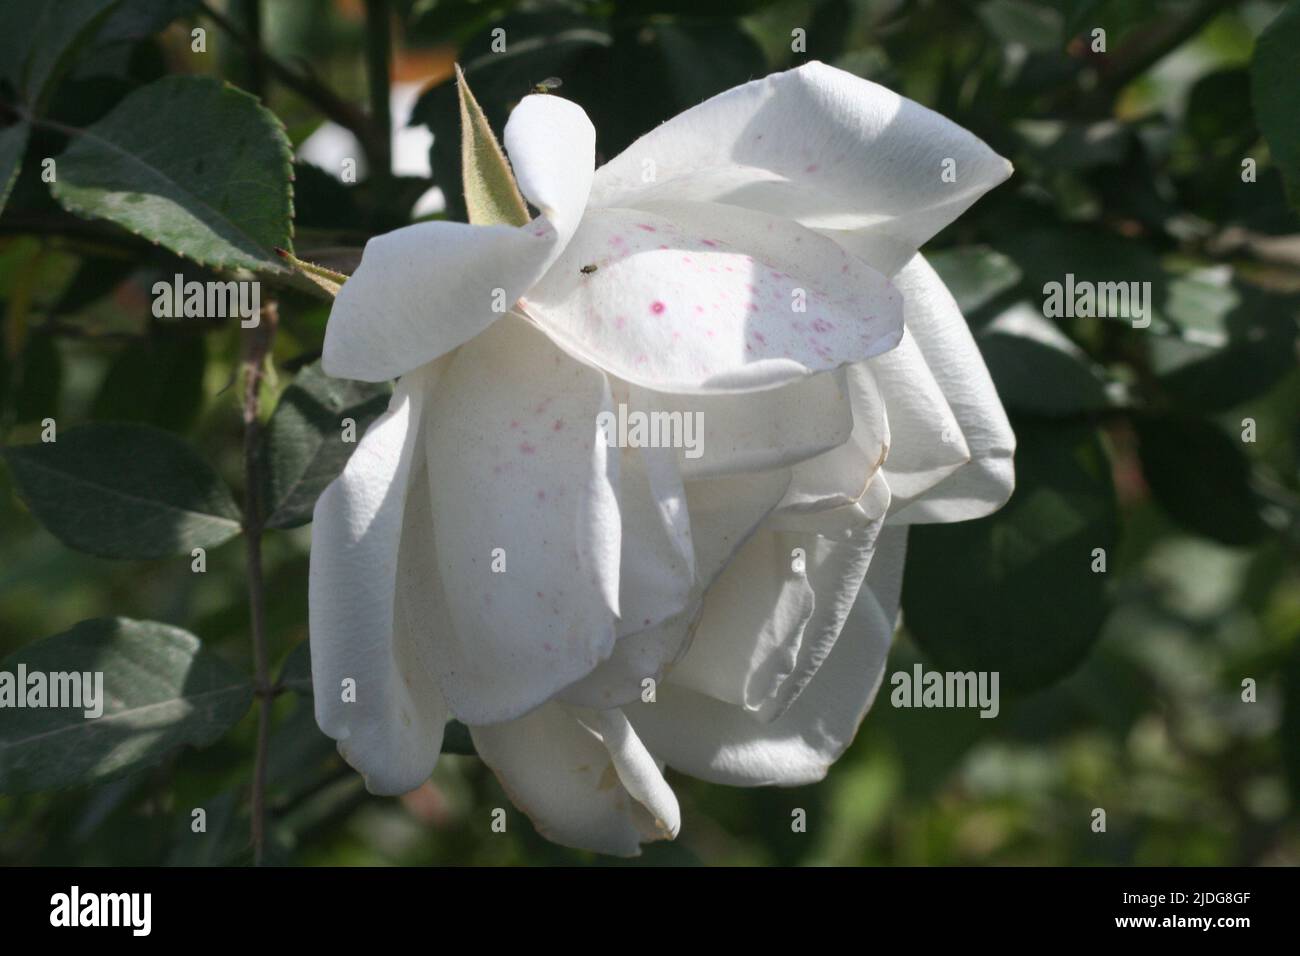 White spotted rose Stock Photo